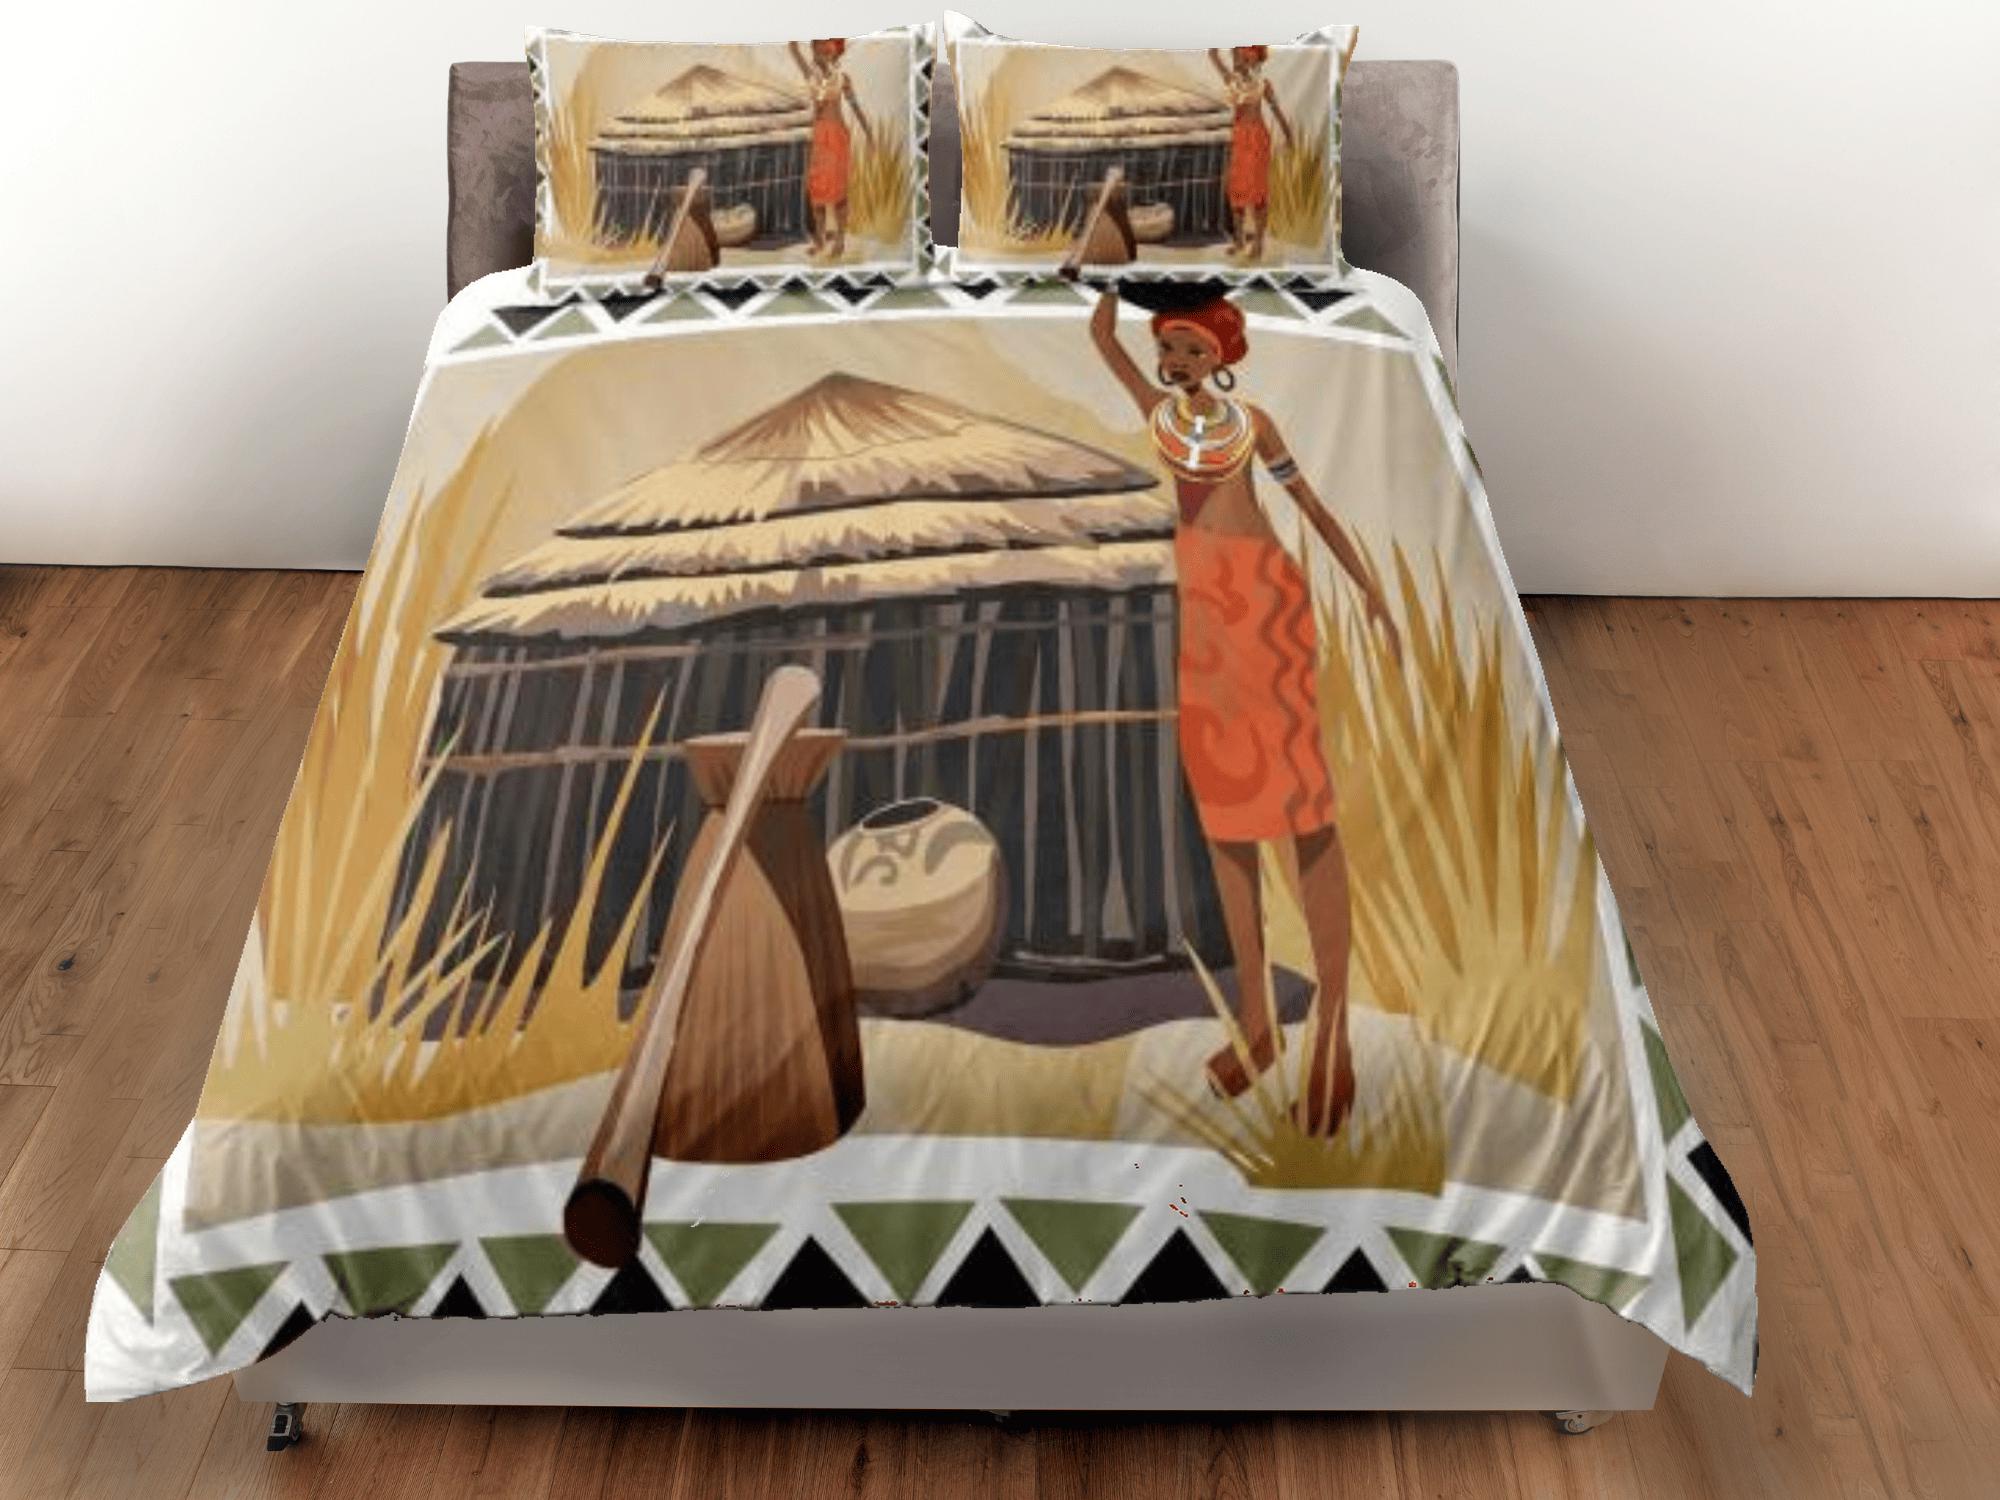 daintyduvet African woman painting bedding set duvet cover, boho bedding, african ethnic designs, afrocentric art designer bedding, south african gift